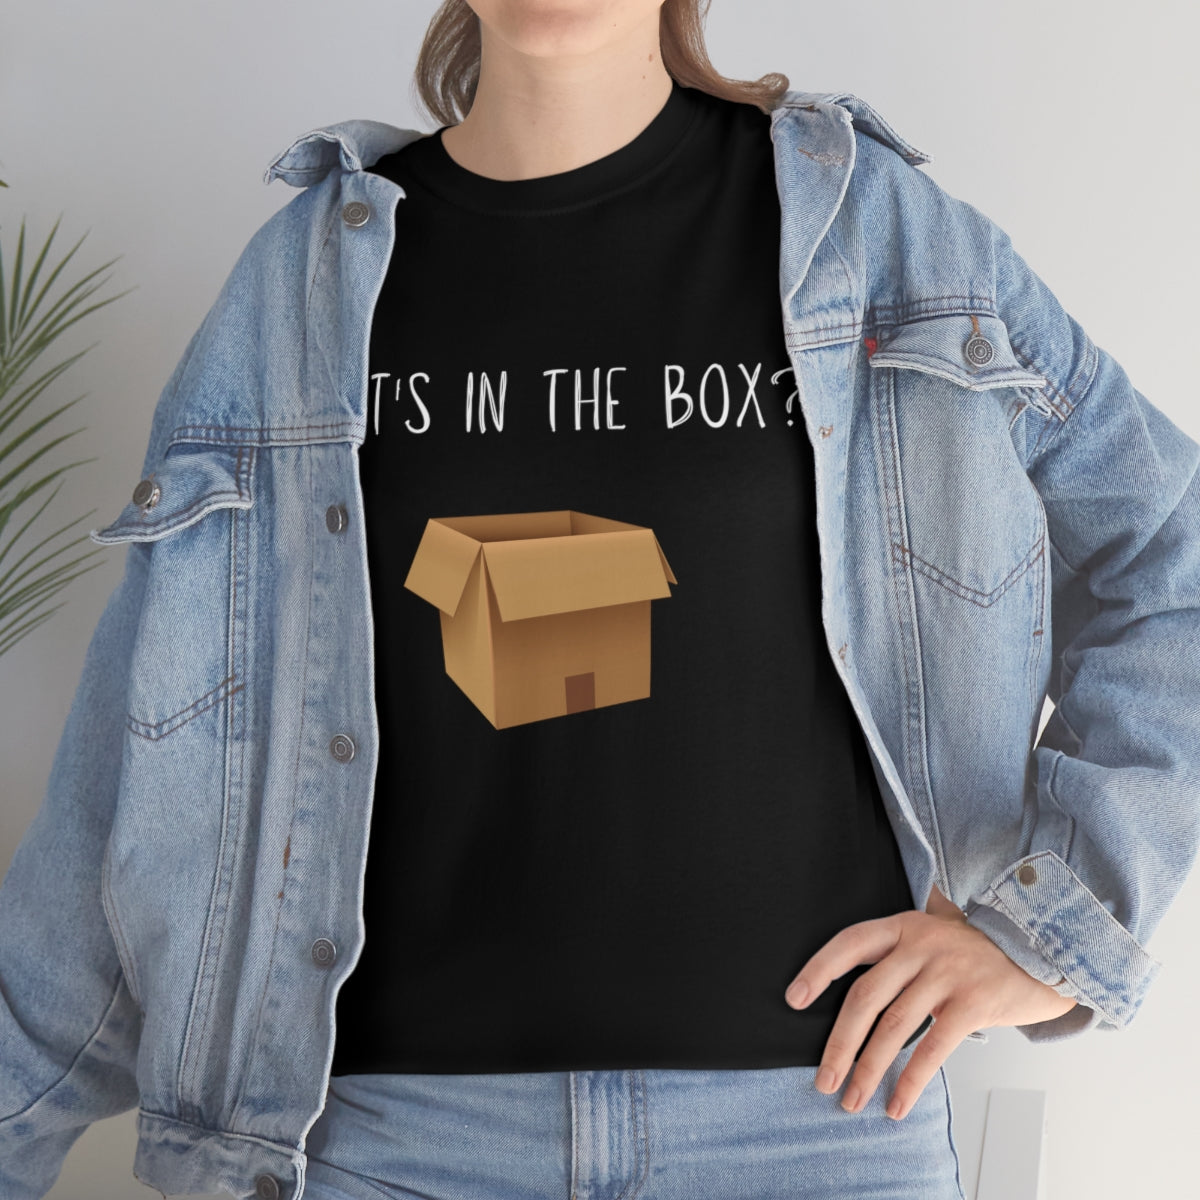 What's in the Box Printed T-shirt Printify